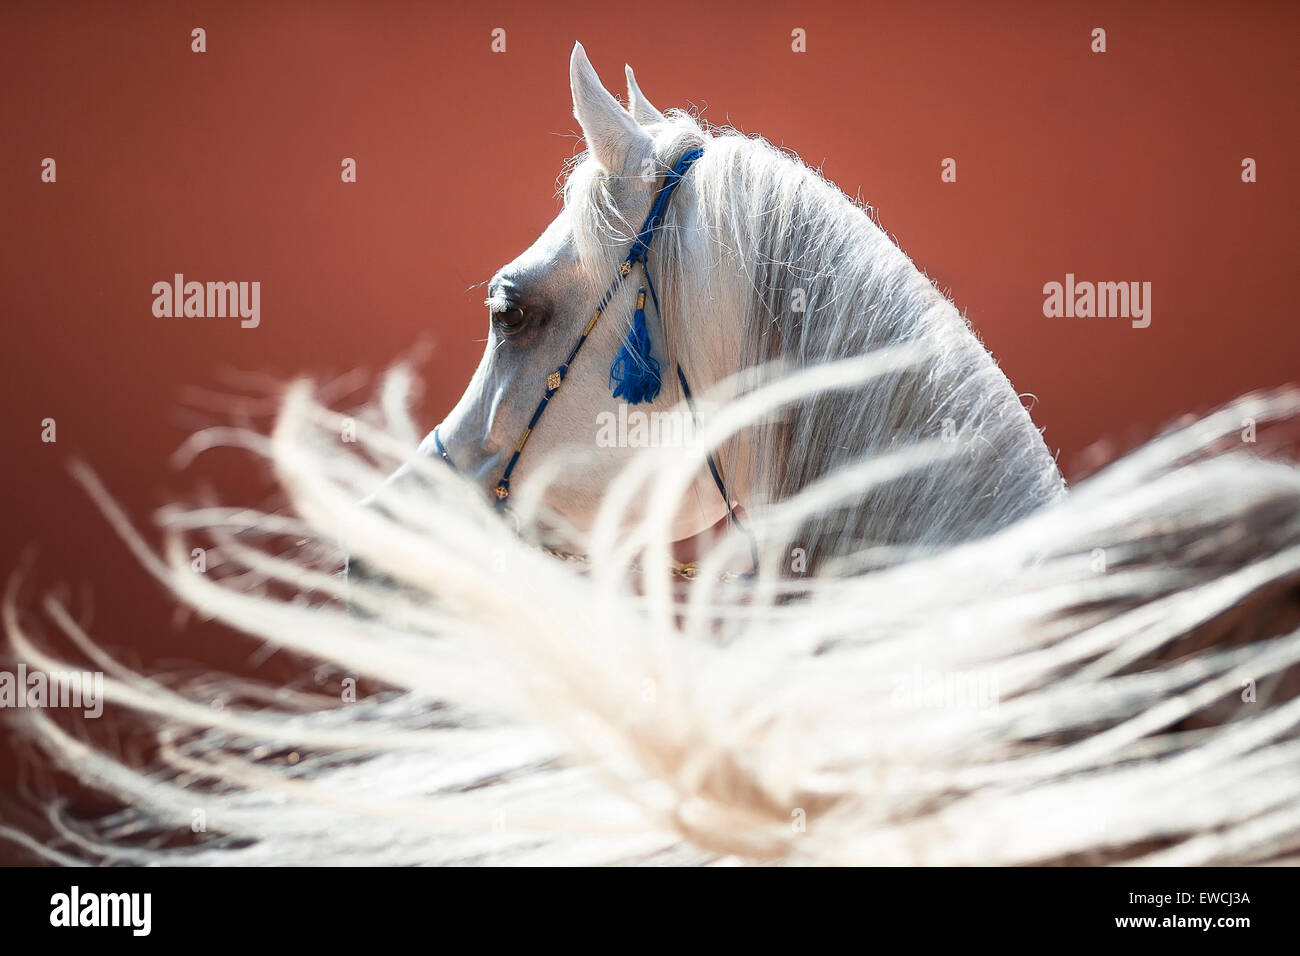 Arabian Horse. Portrait of gray stallion with its tail in foreground. Egypt Stock Photo